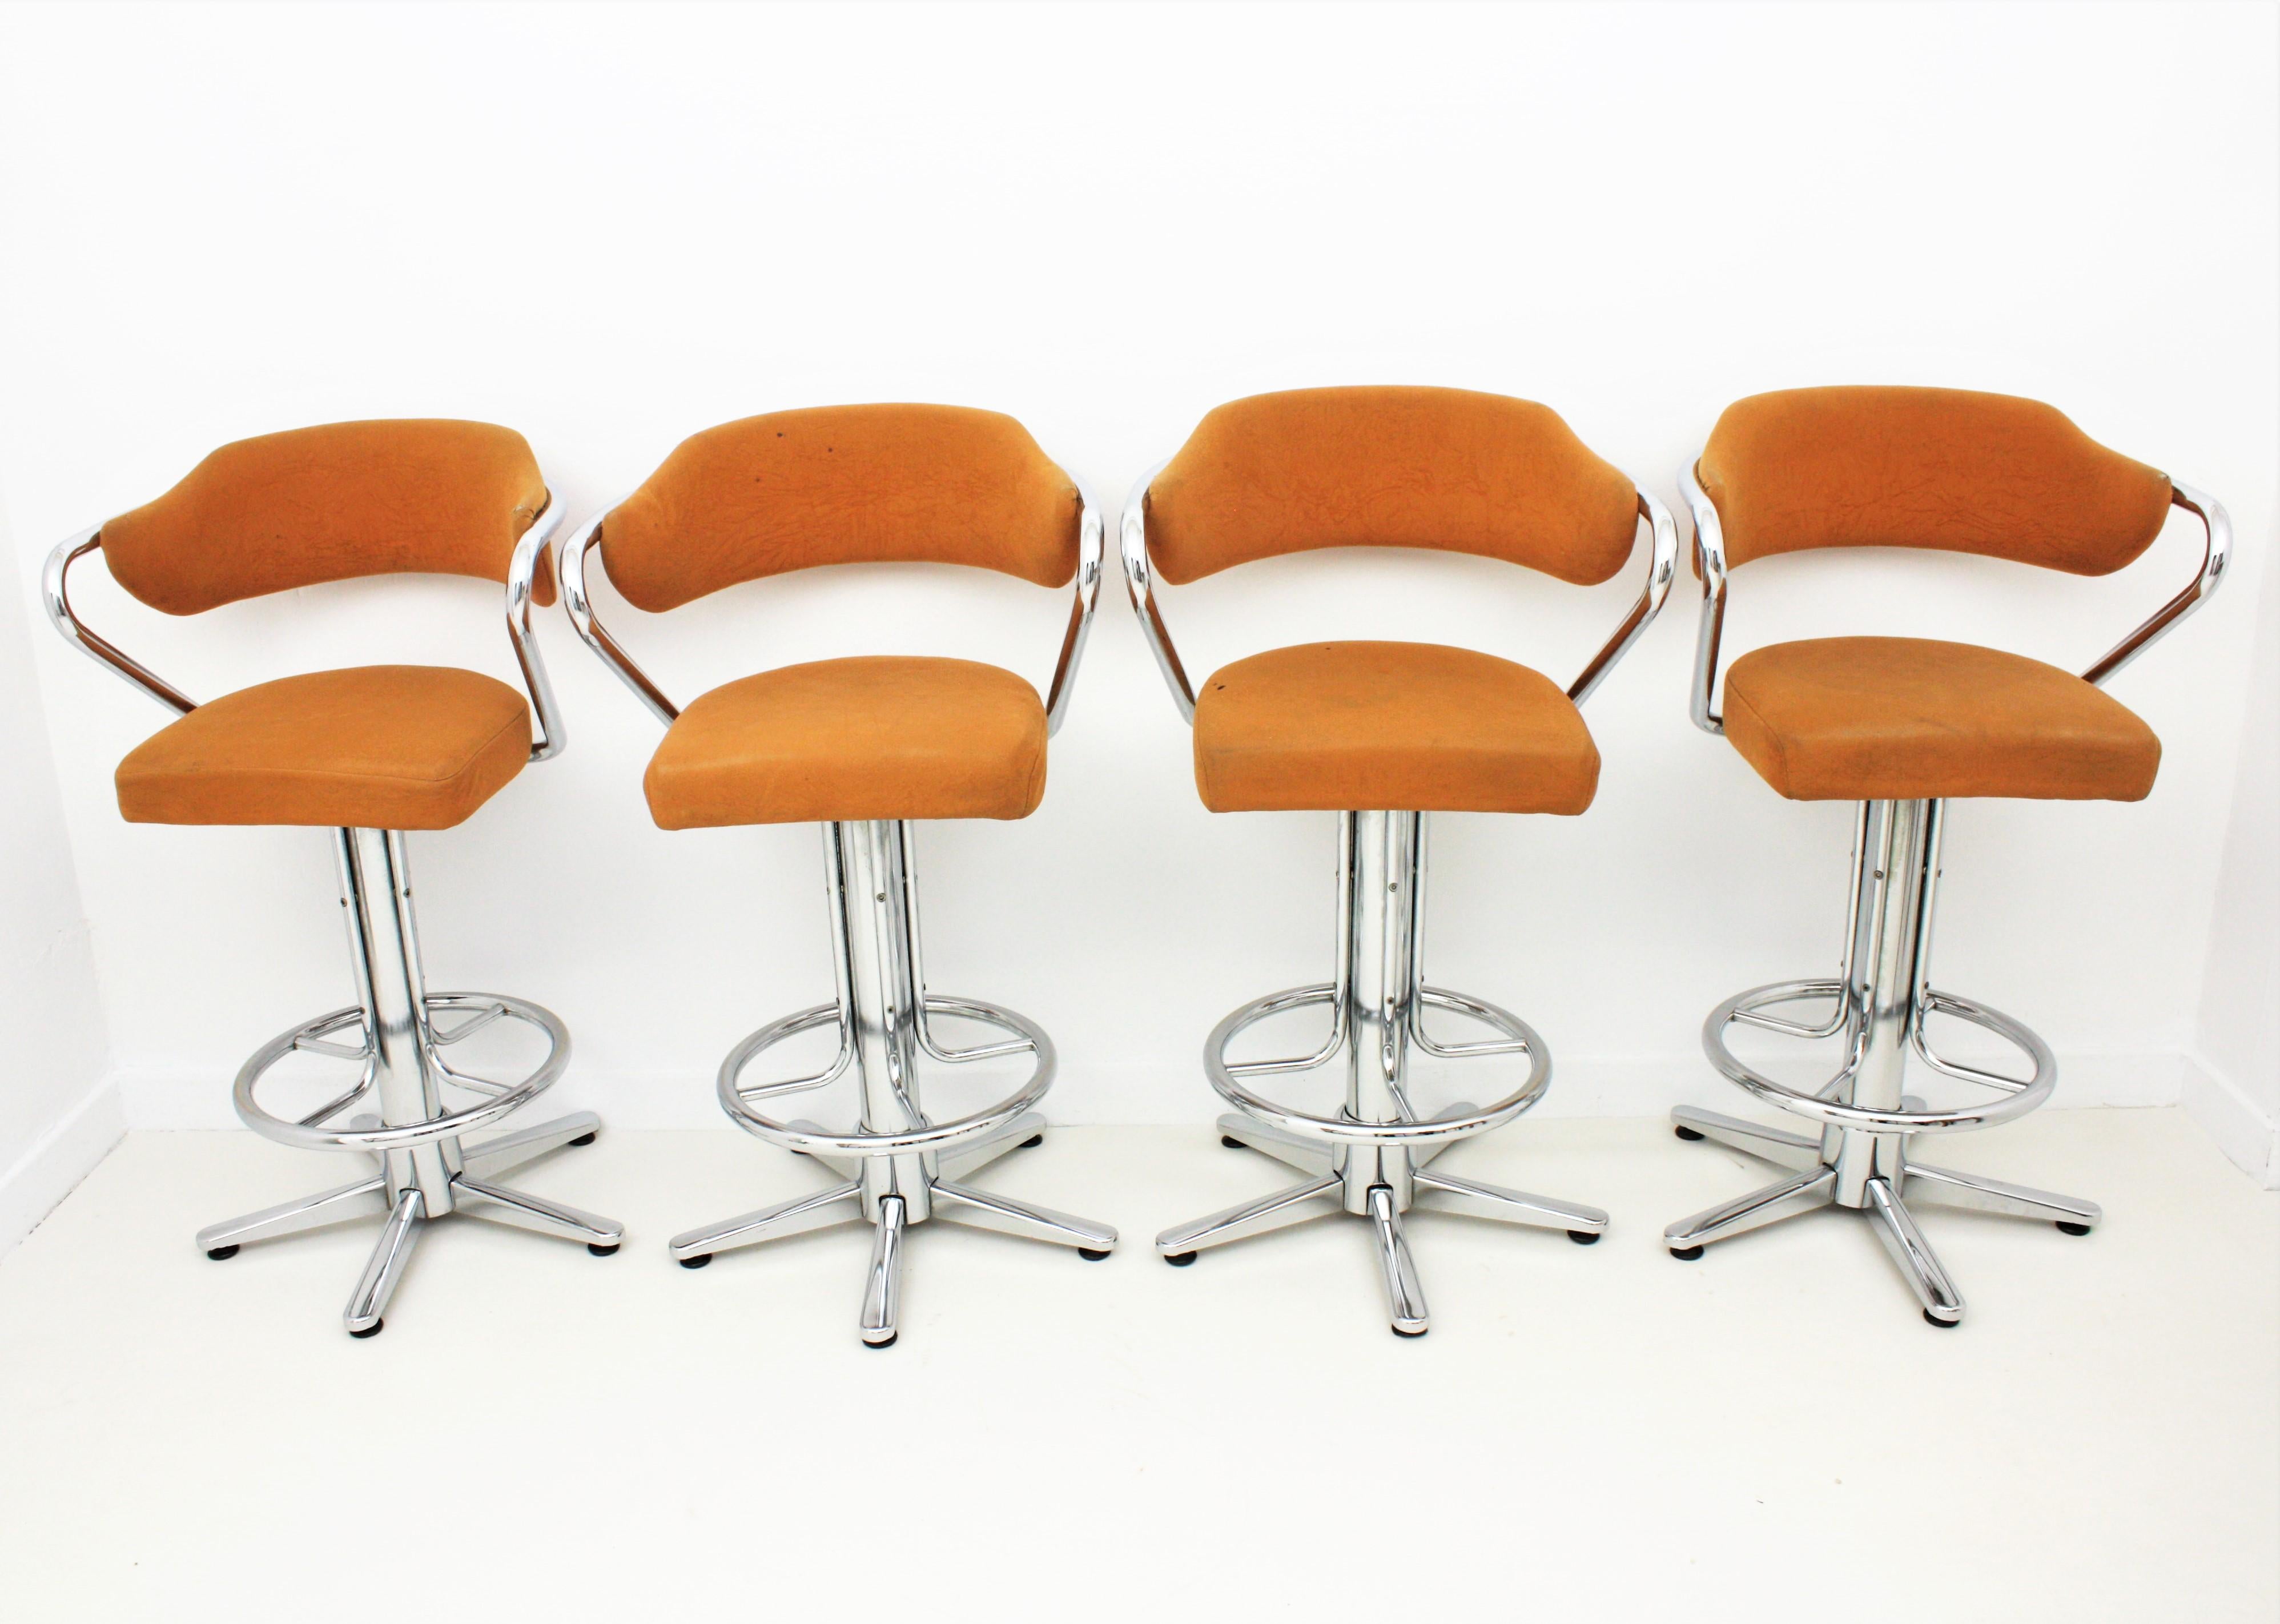 Set of Four Steel Swivel Bar Stools with Arms, Spain, 1970s 2